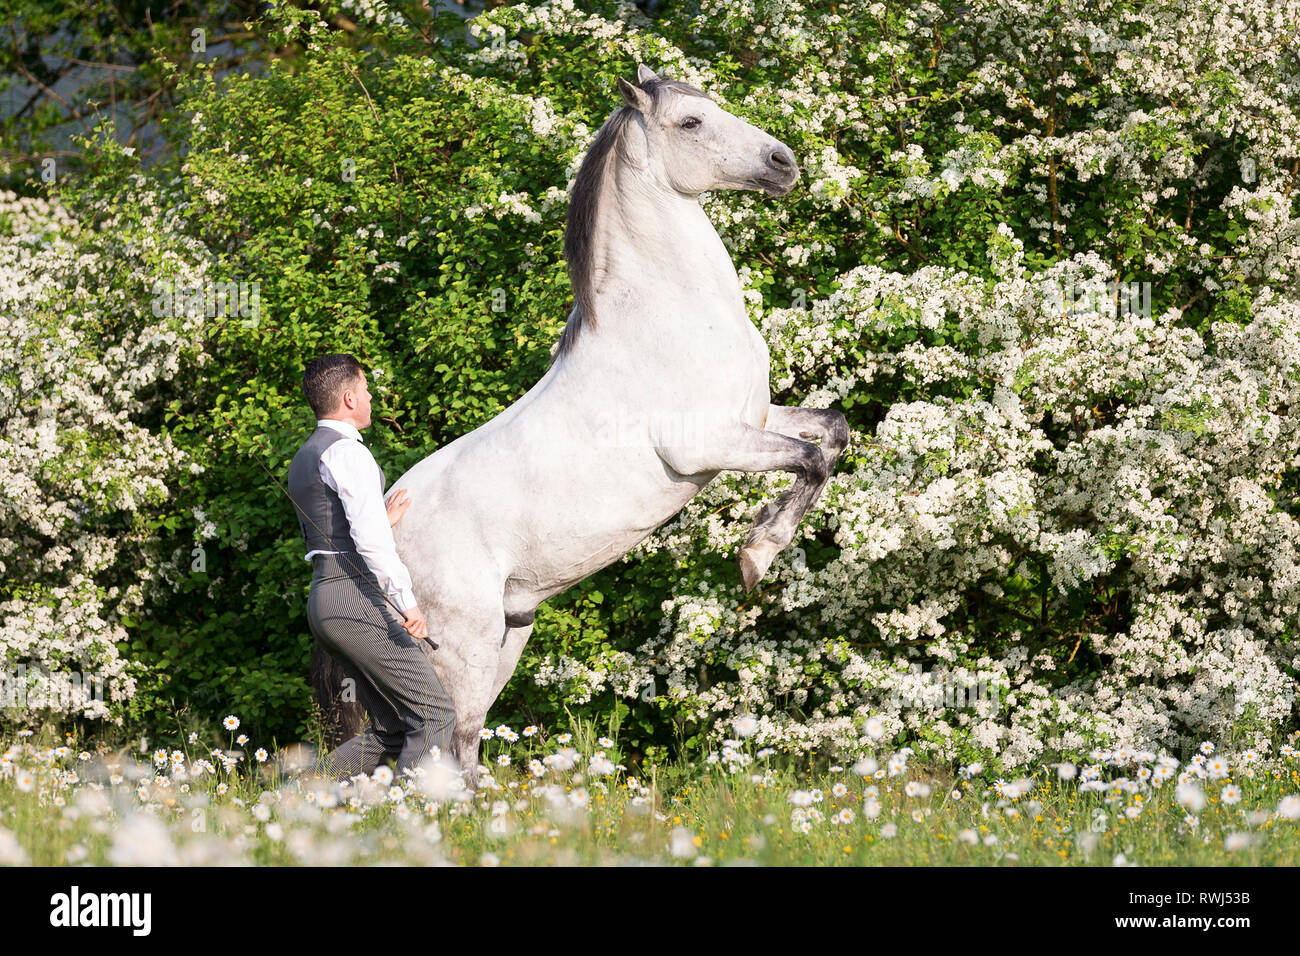 Pure Spanish Horse, Andalusian. Blind gelding rearing on a flowering meadow, next to its rider and owner Sandro Huerzeler. Switzerland Stock Photo